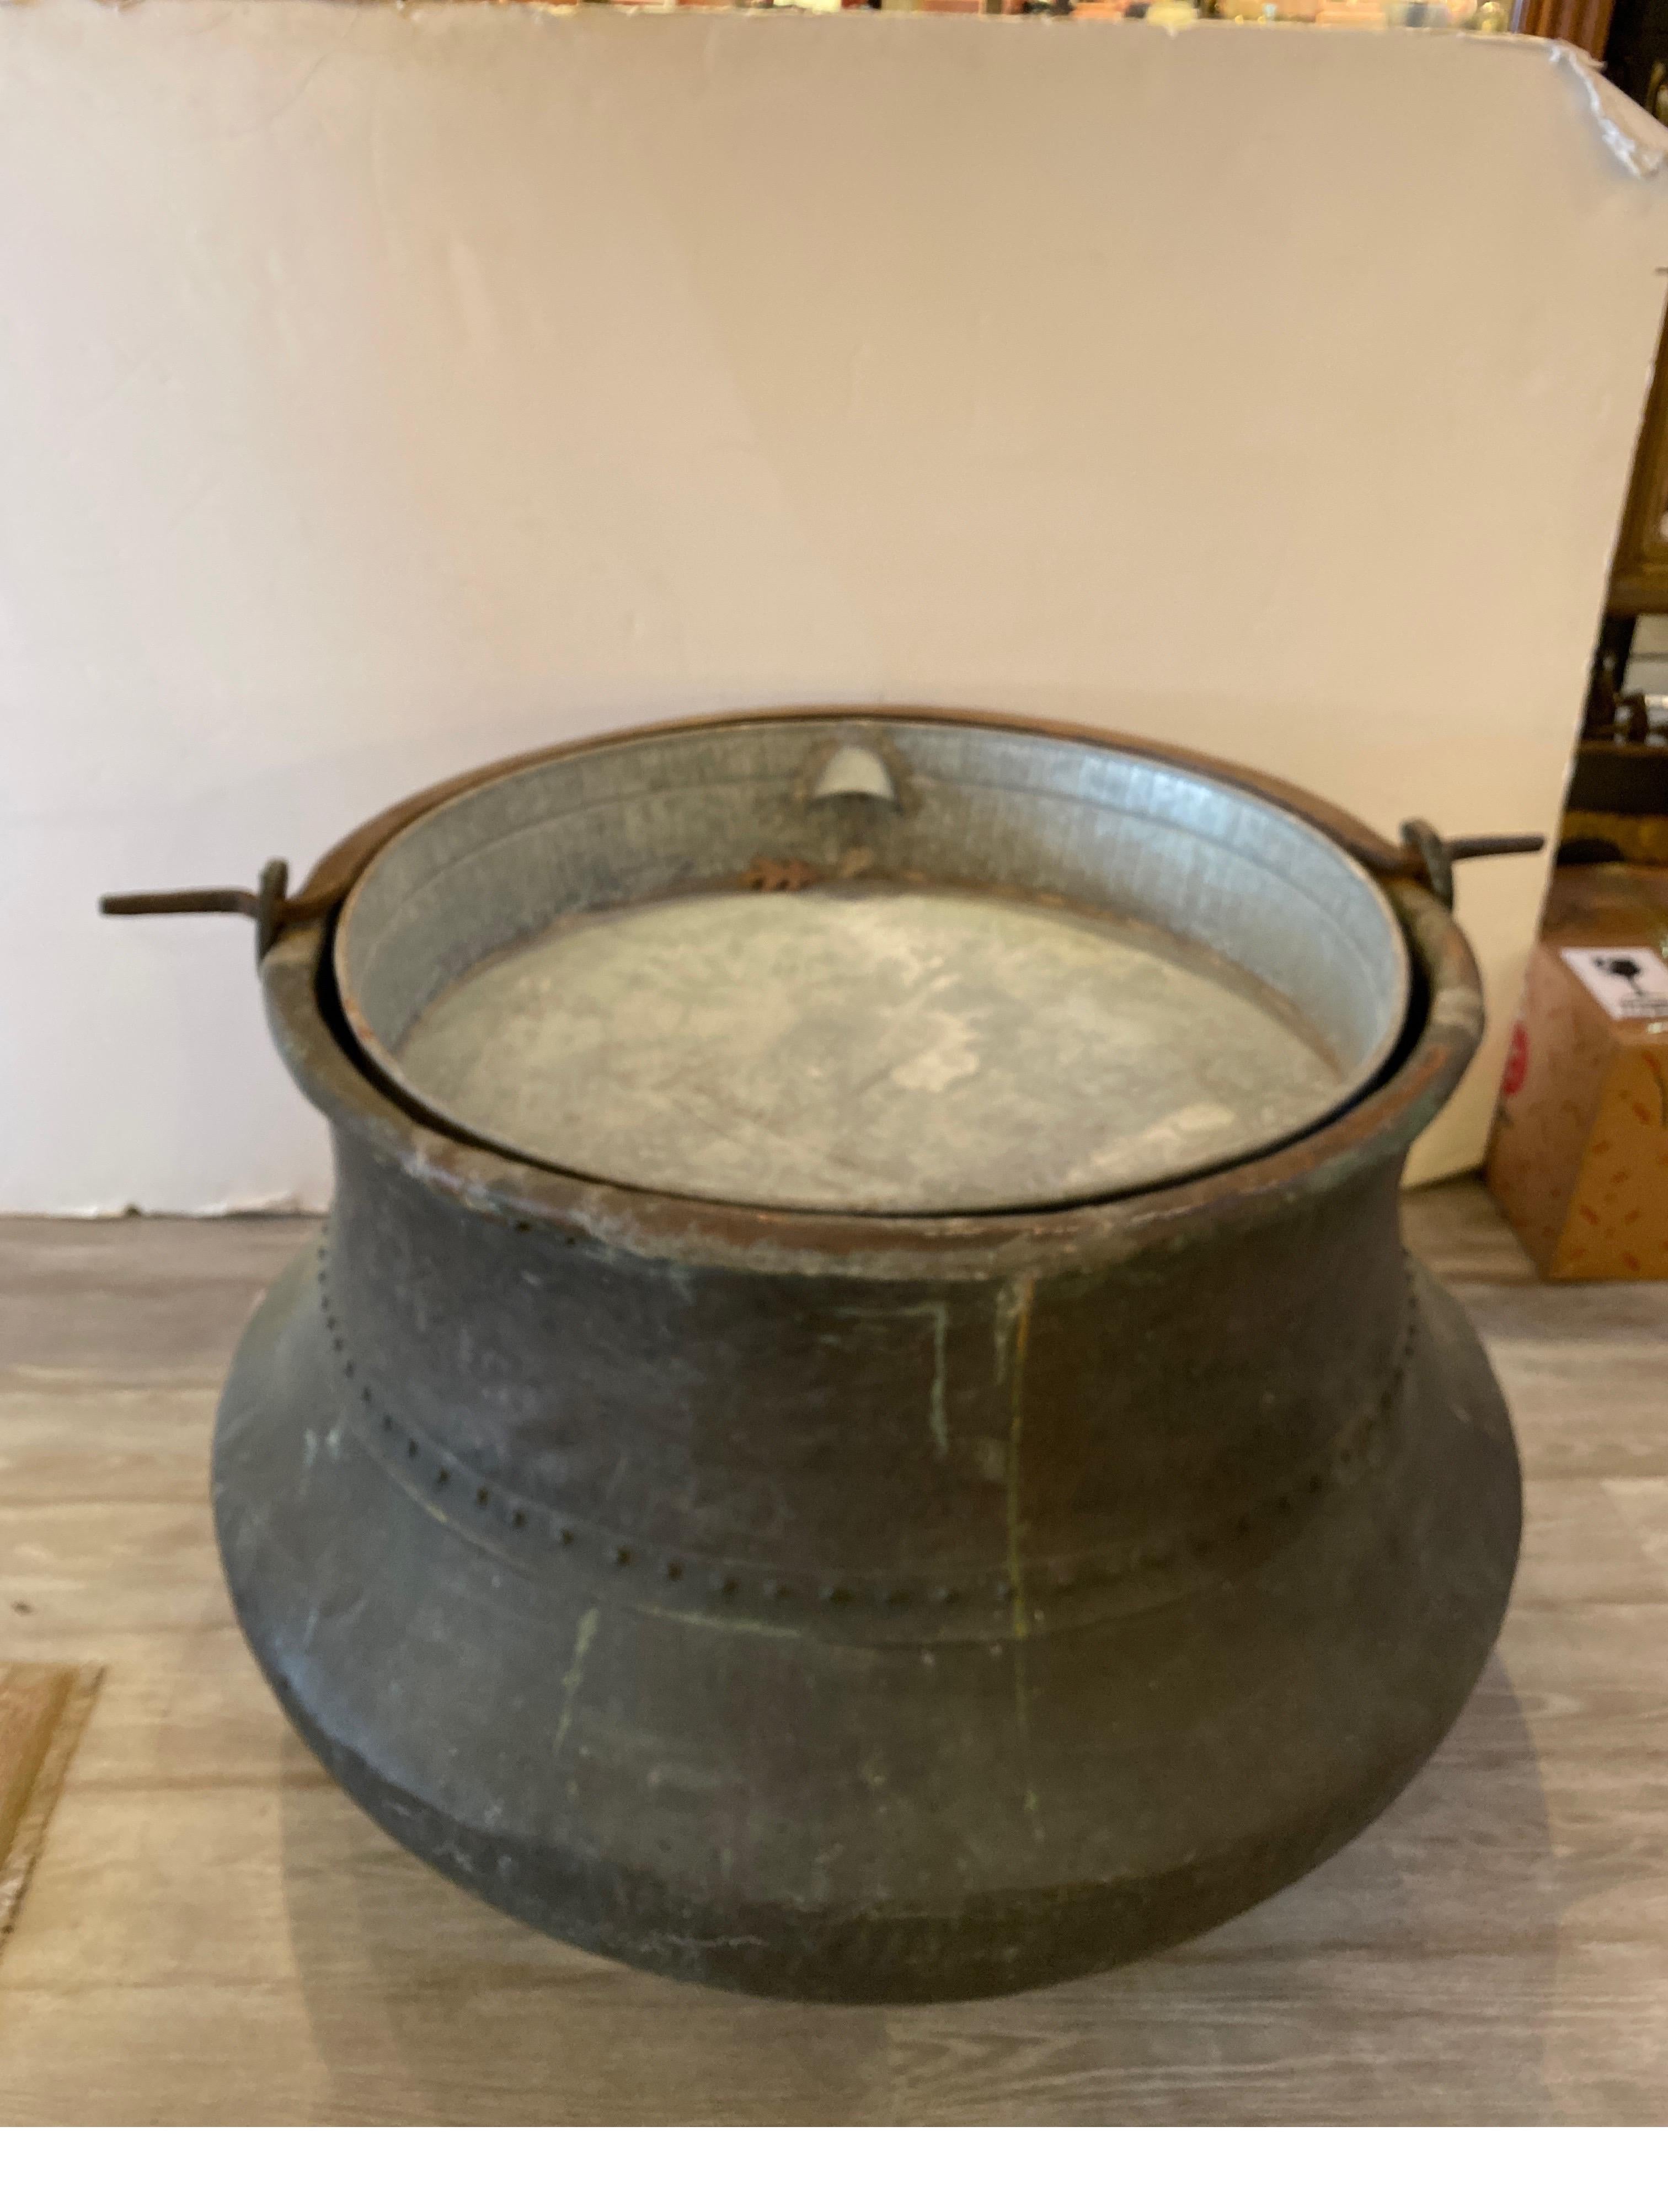 A very large copper cauldron with later added galvanized liner with welded steel support. The naturally aged copper surface with with hand forged iron handle. The pot is initialed R.C.P. and dated 1836. Hand made with later drilled holes at teh